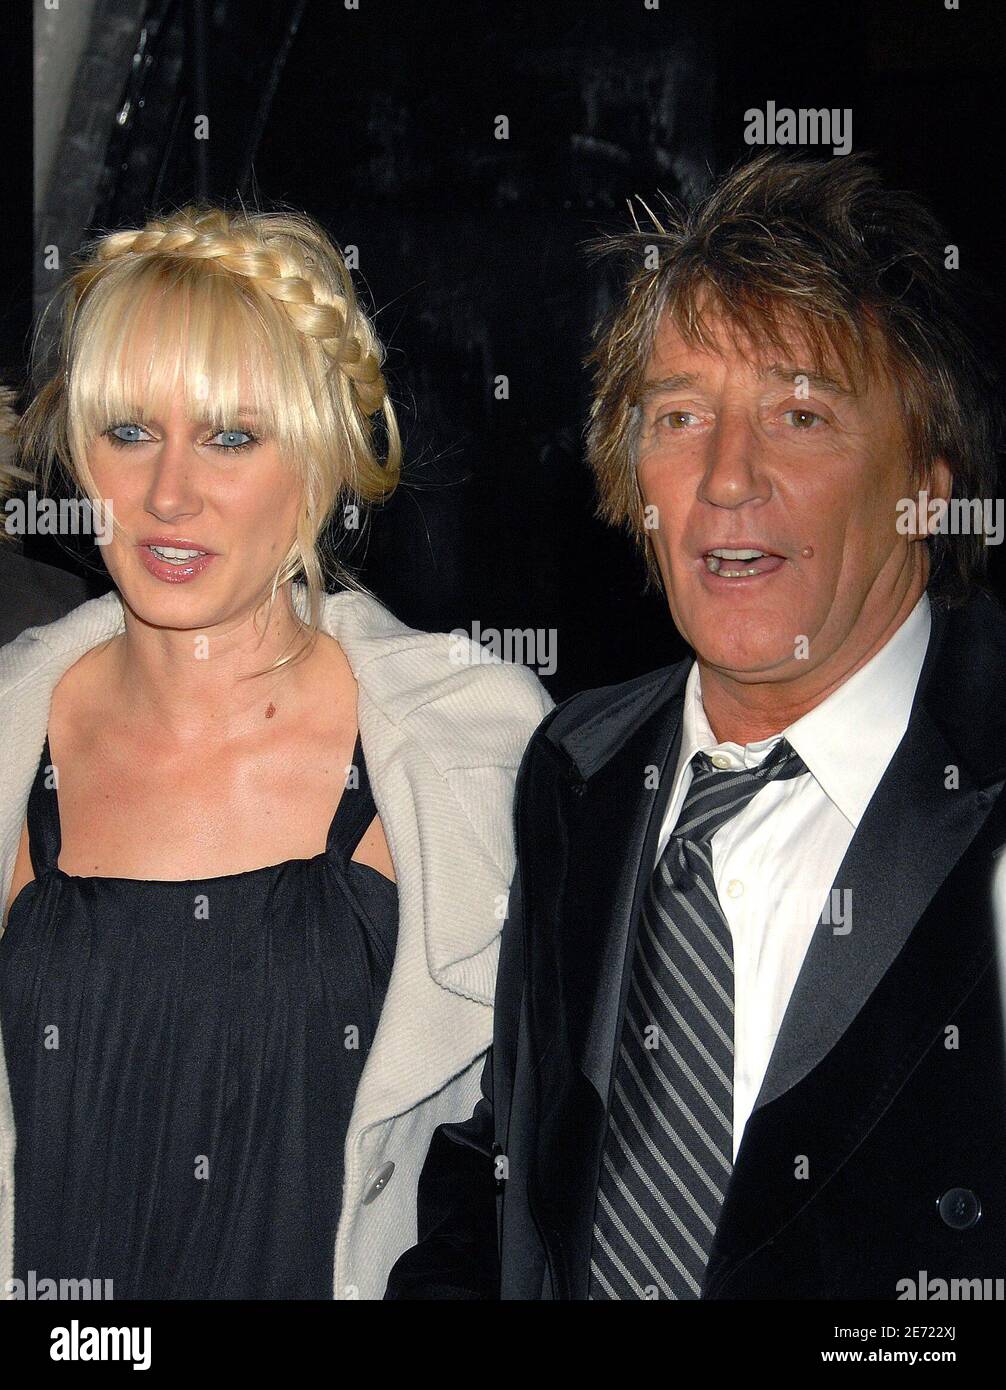 Rod Stewart and his daughter Kimberly Stewart arrive to the Marc Jacobs show as part of the Mercedes-Benz Fashion Week Fall-Winter 2007, at NY State Armory in New York City, NY, USA on February 5, 2007. Photo by David Miller/ABACAPRESS.COM Stock Photo